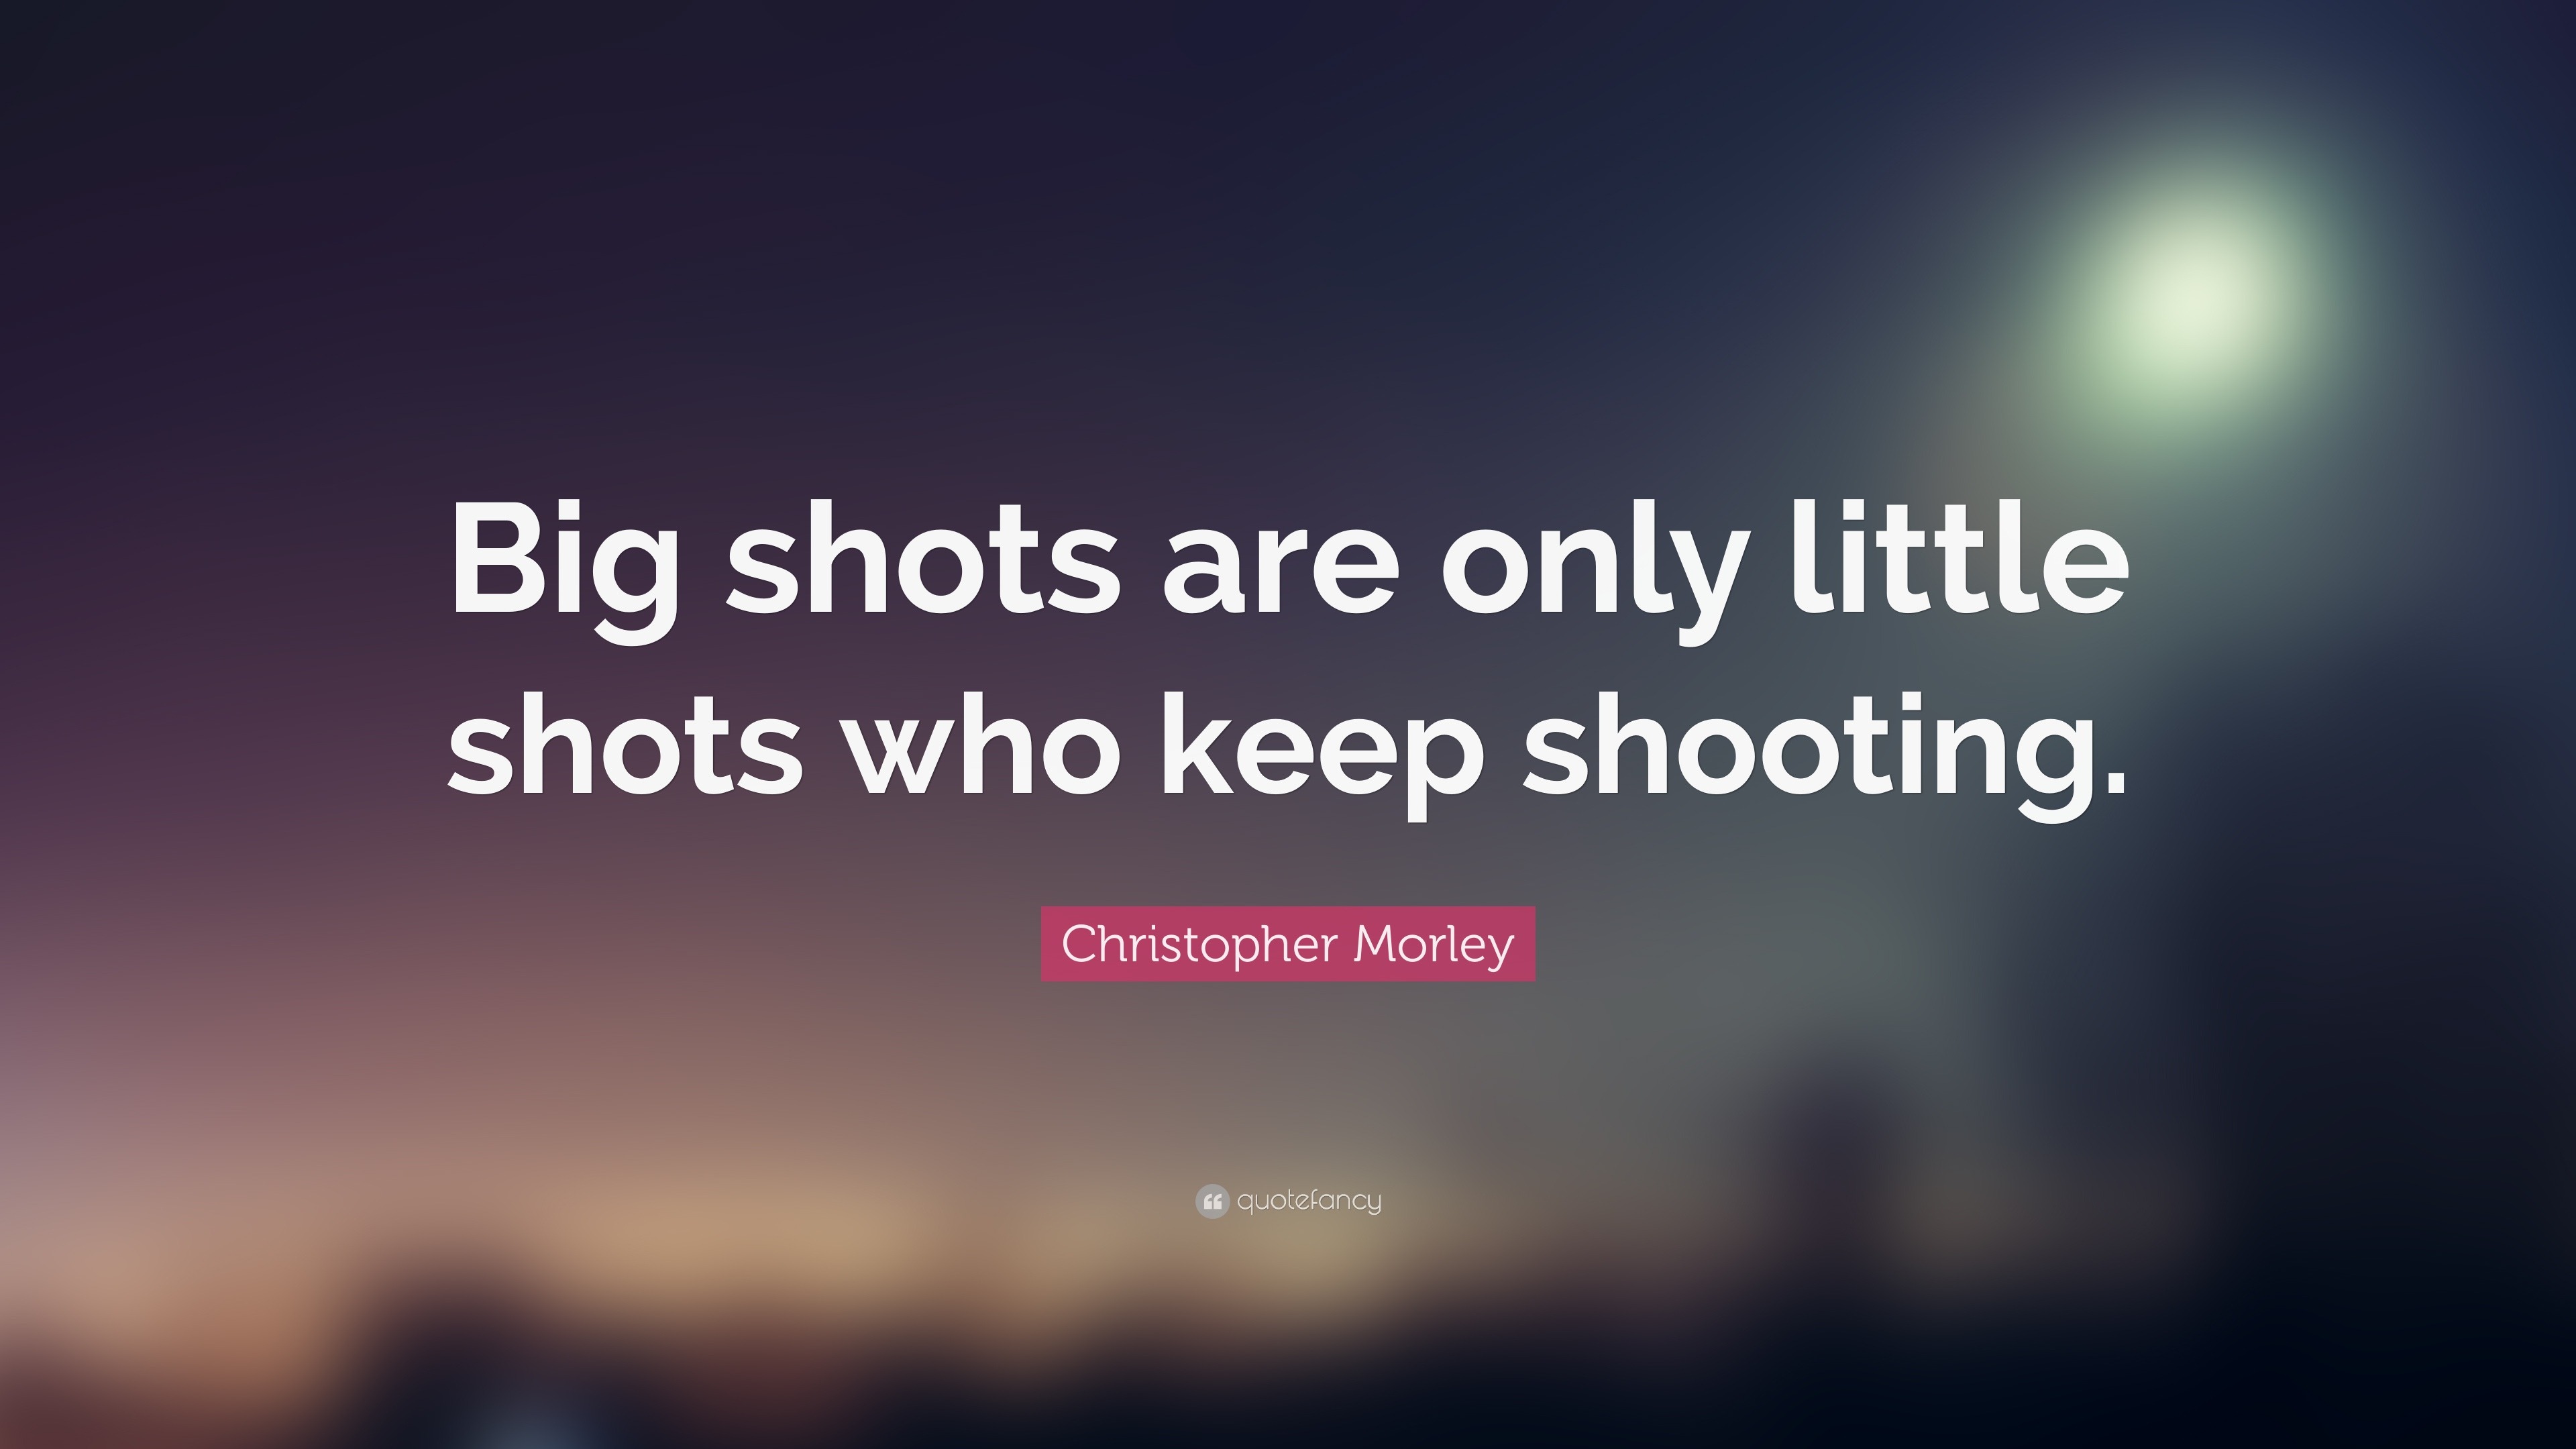 Christopher Morley - Big shots are only little shots who